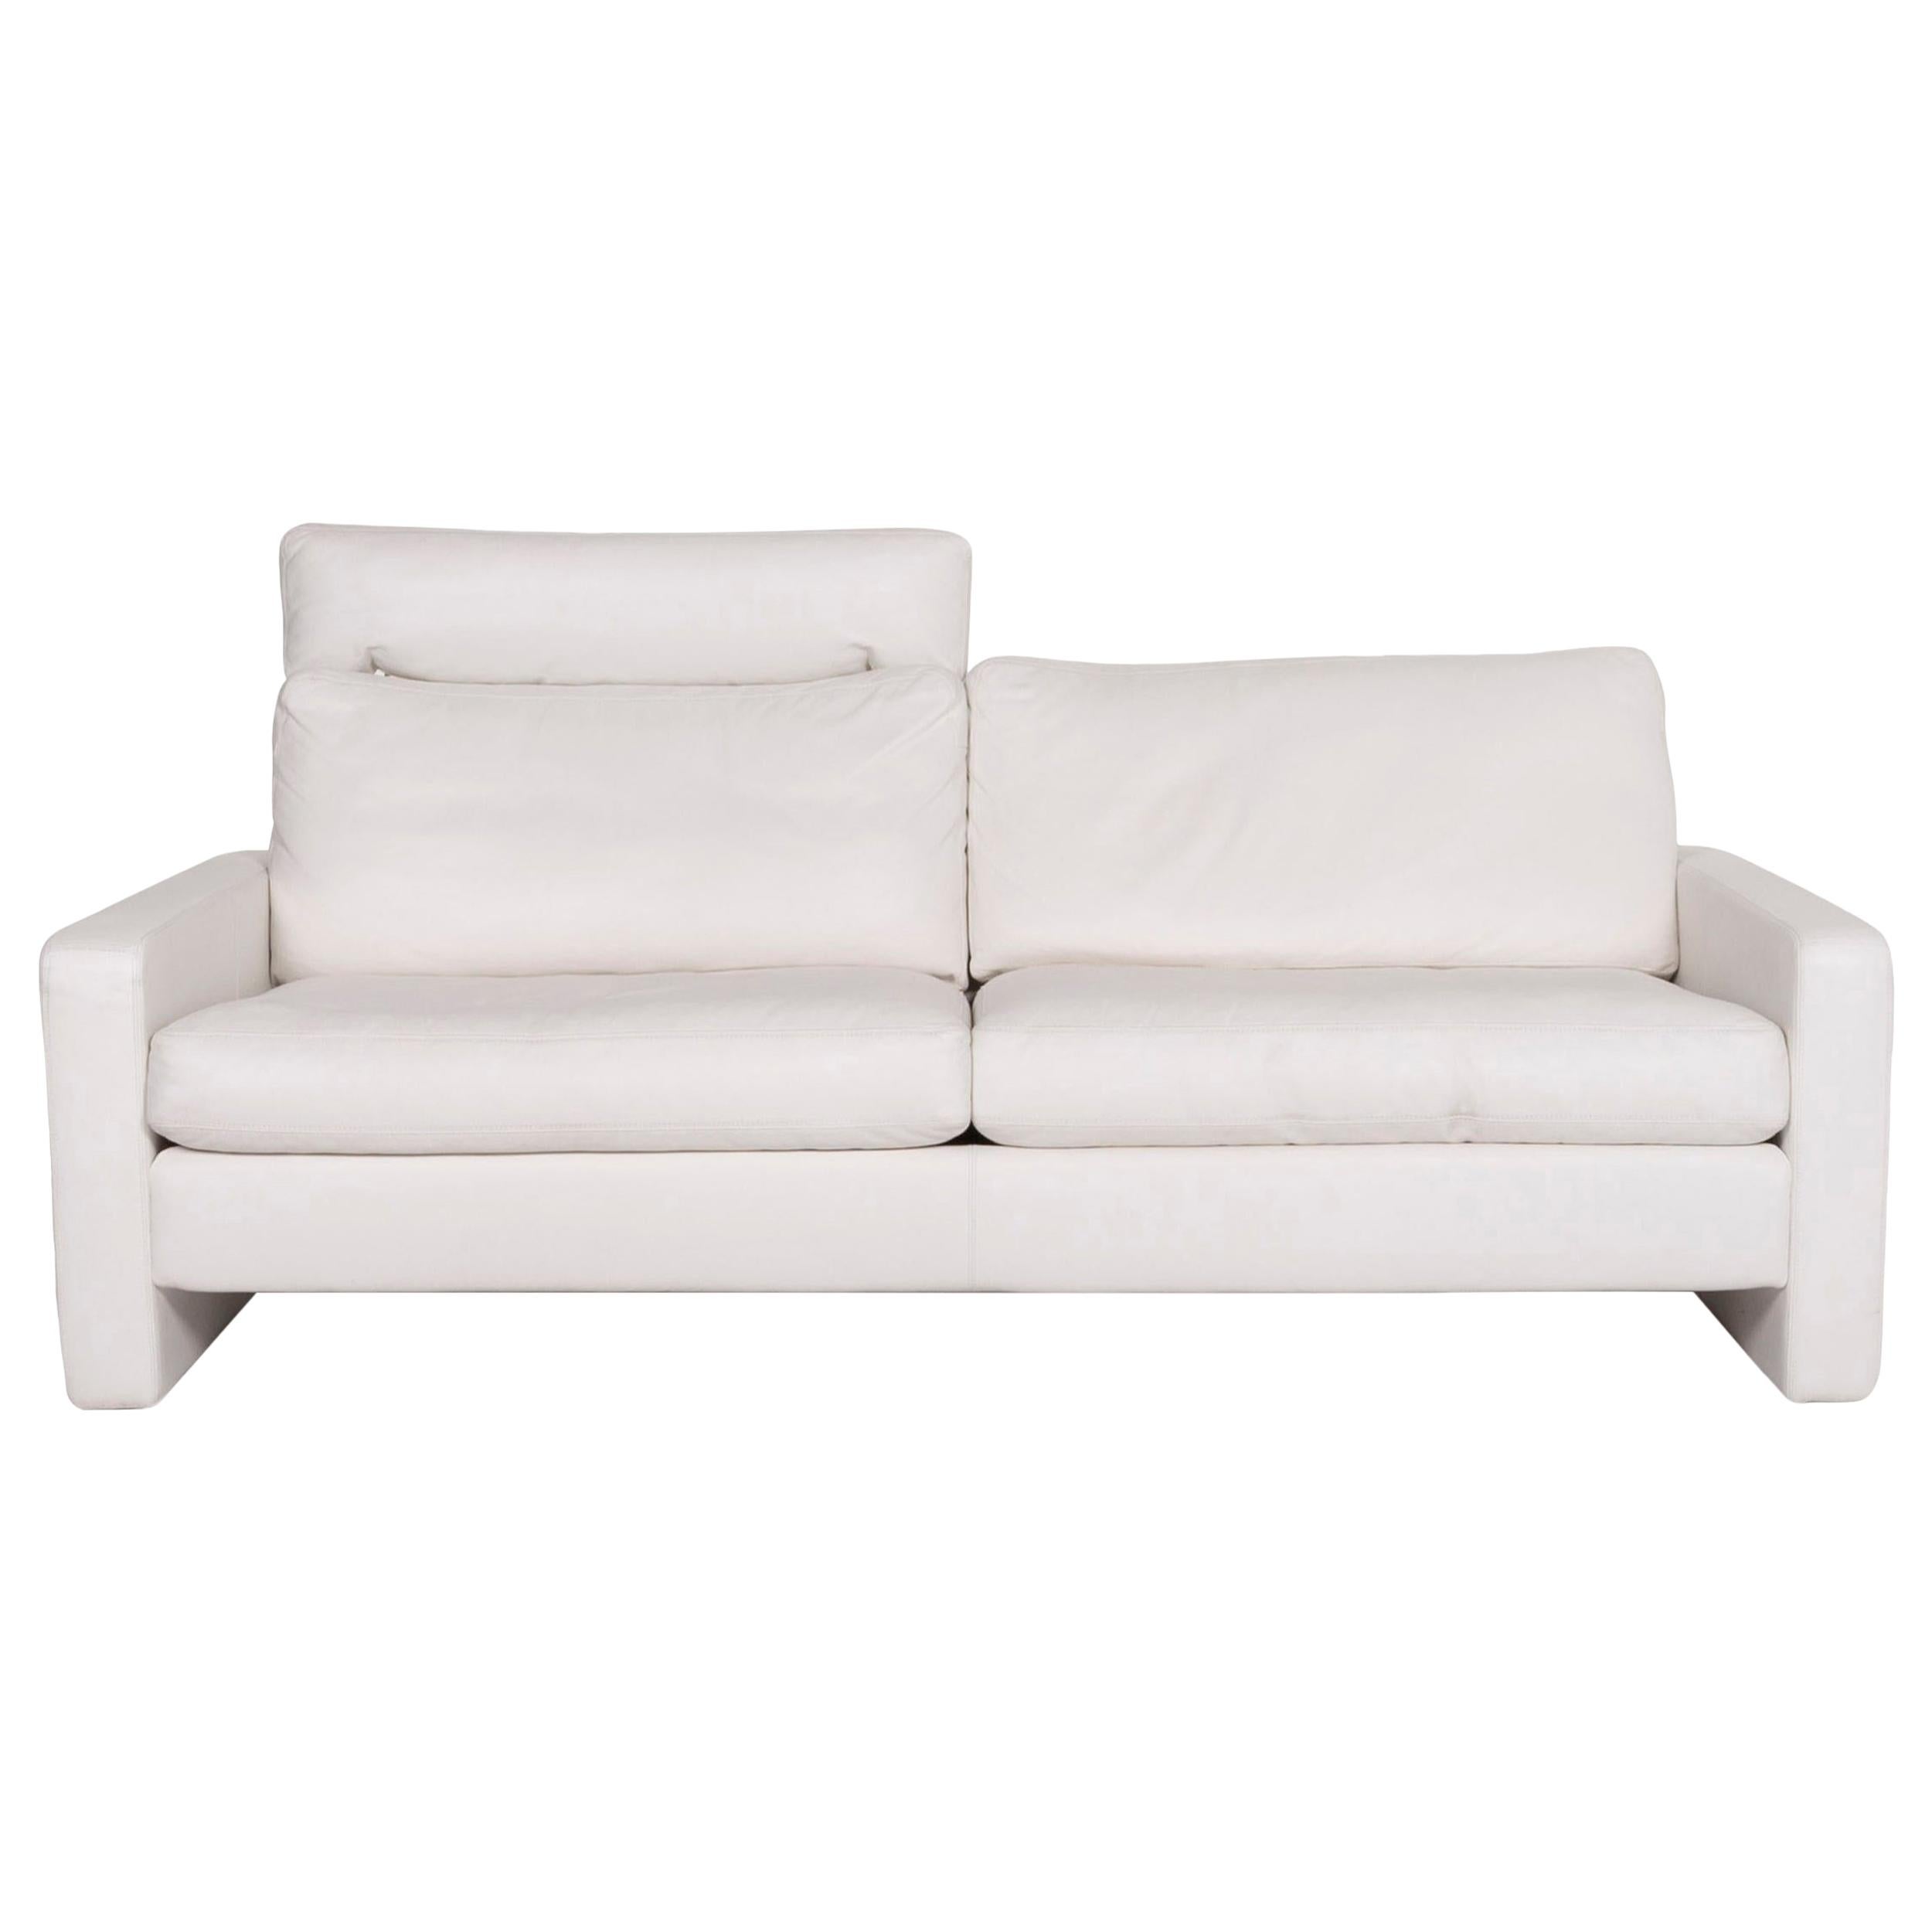 Cor Conseta Leather Sofa White Two-Seat Couch For Sale